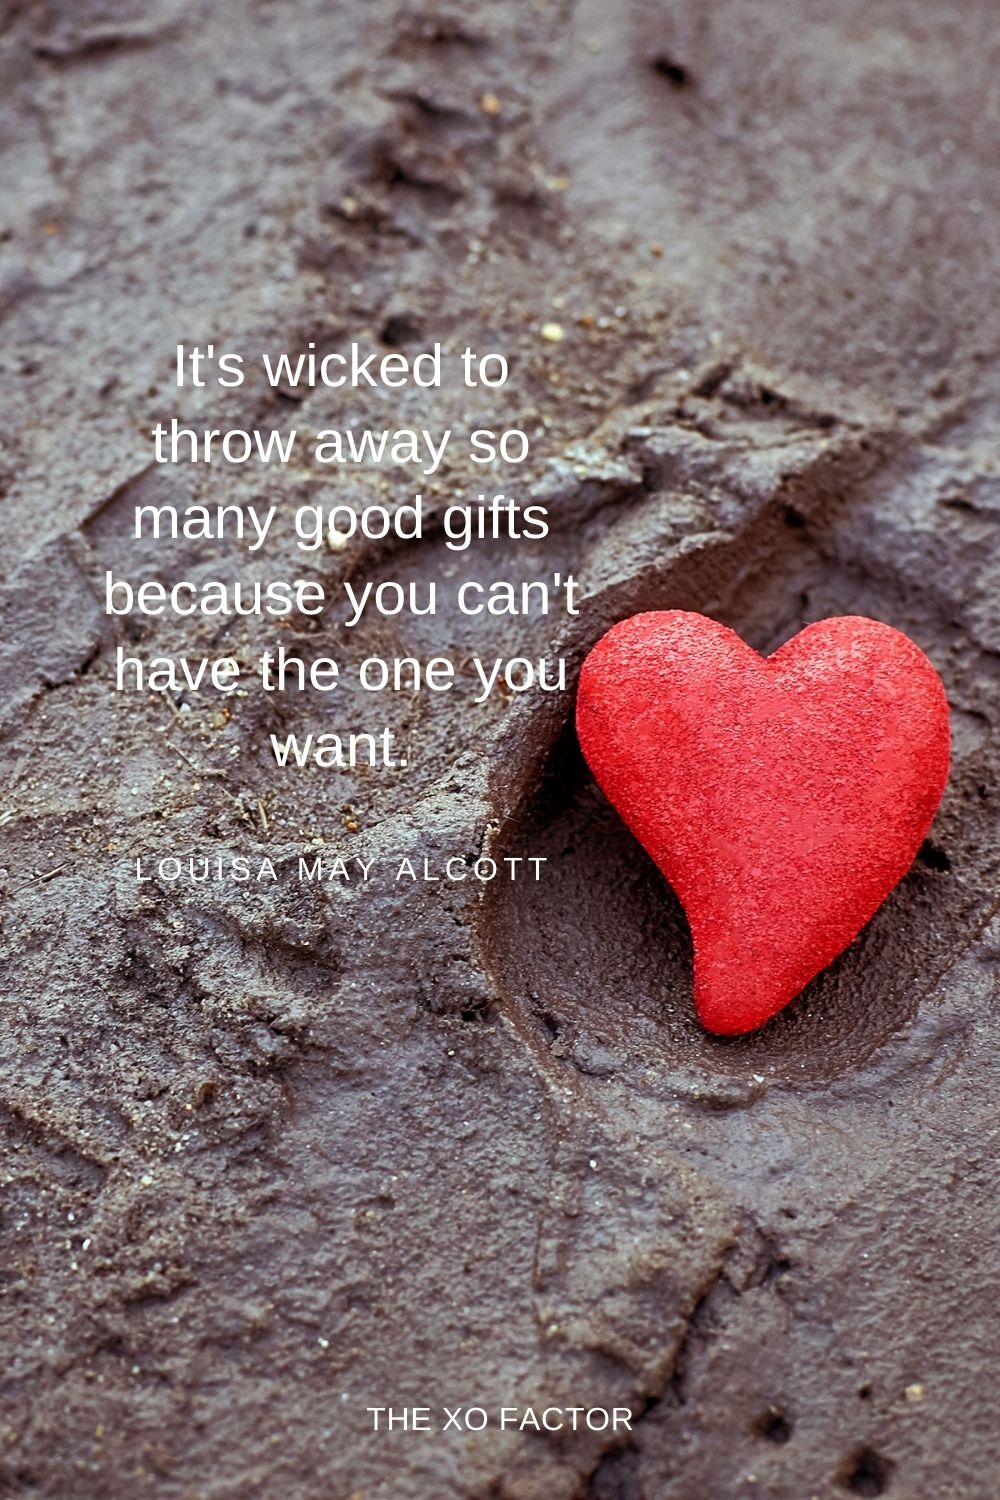 It's wicked to throw away so many good gifts because you can't have the one you want. Louisa May Alcott